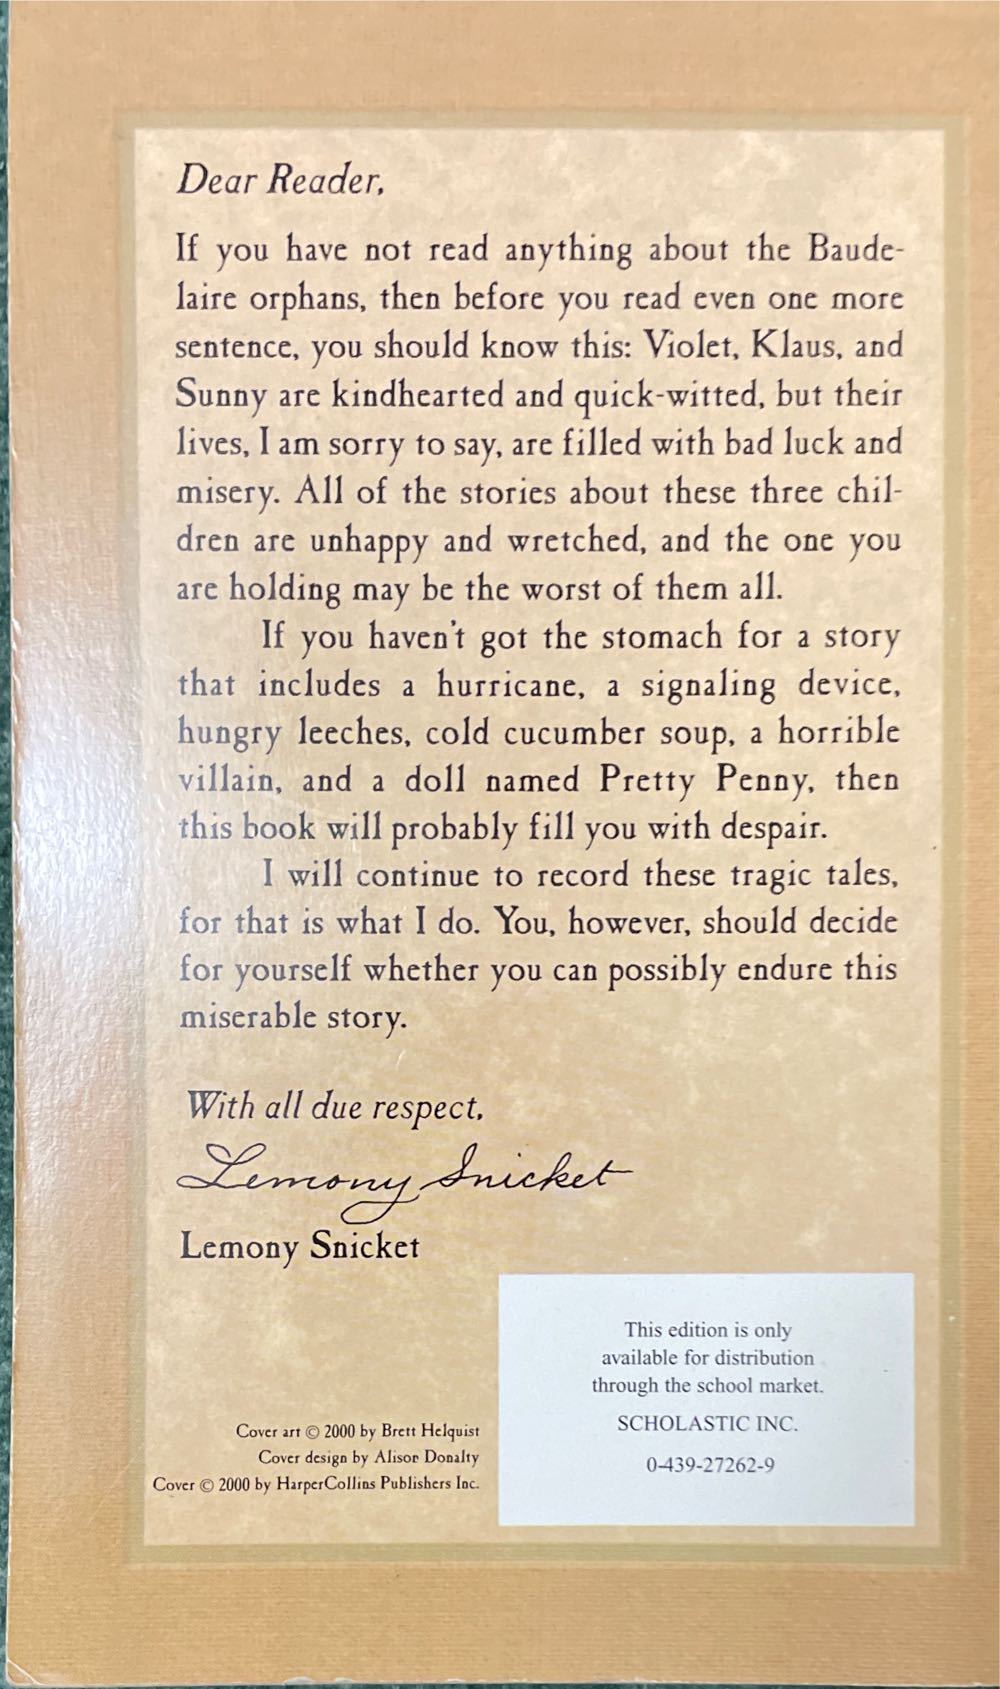 A Series Of Unfortunate Events #3: The Wide Window - Lemony Snicket (Scholastic - Paperback) book collectible [Barcode 9780439272629] - Main Image 2